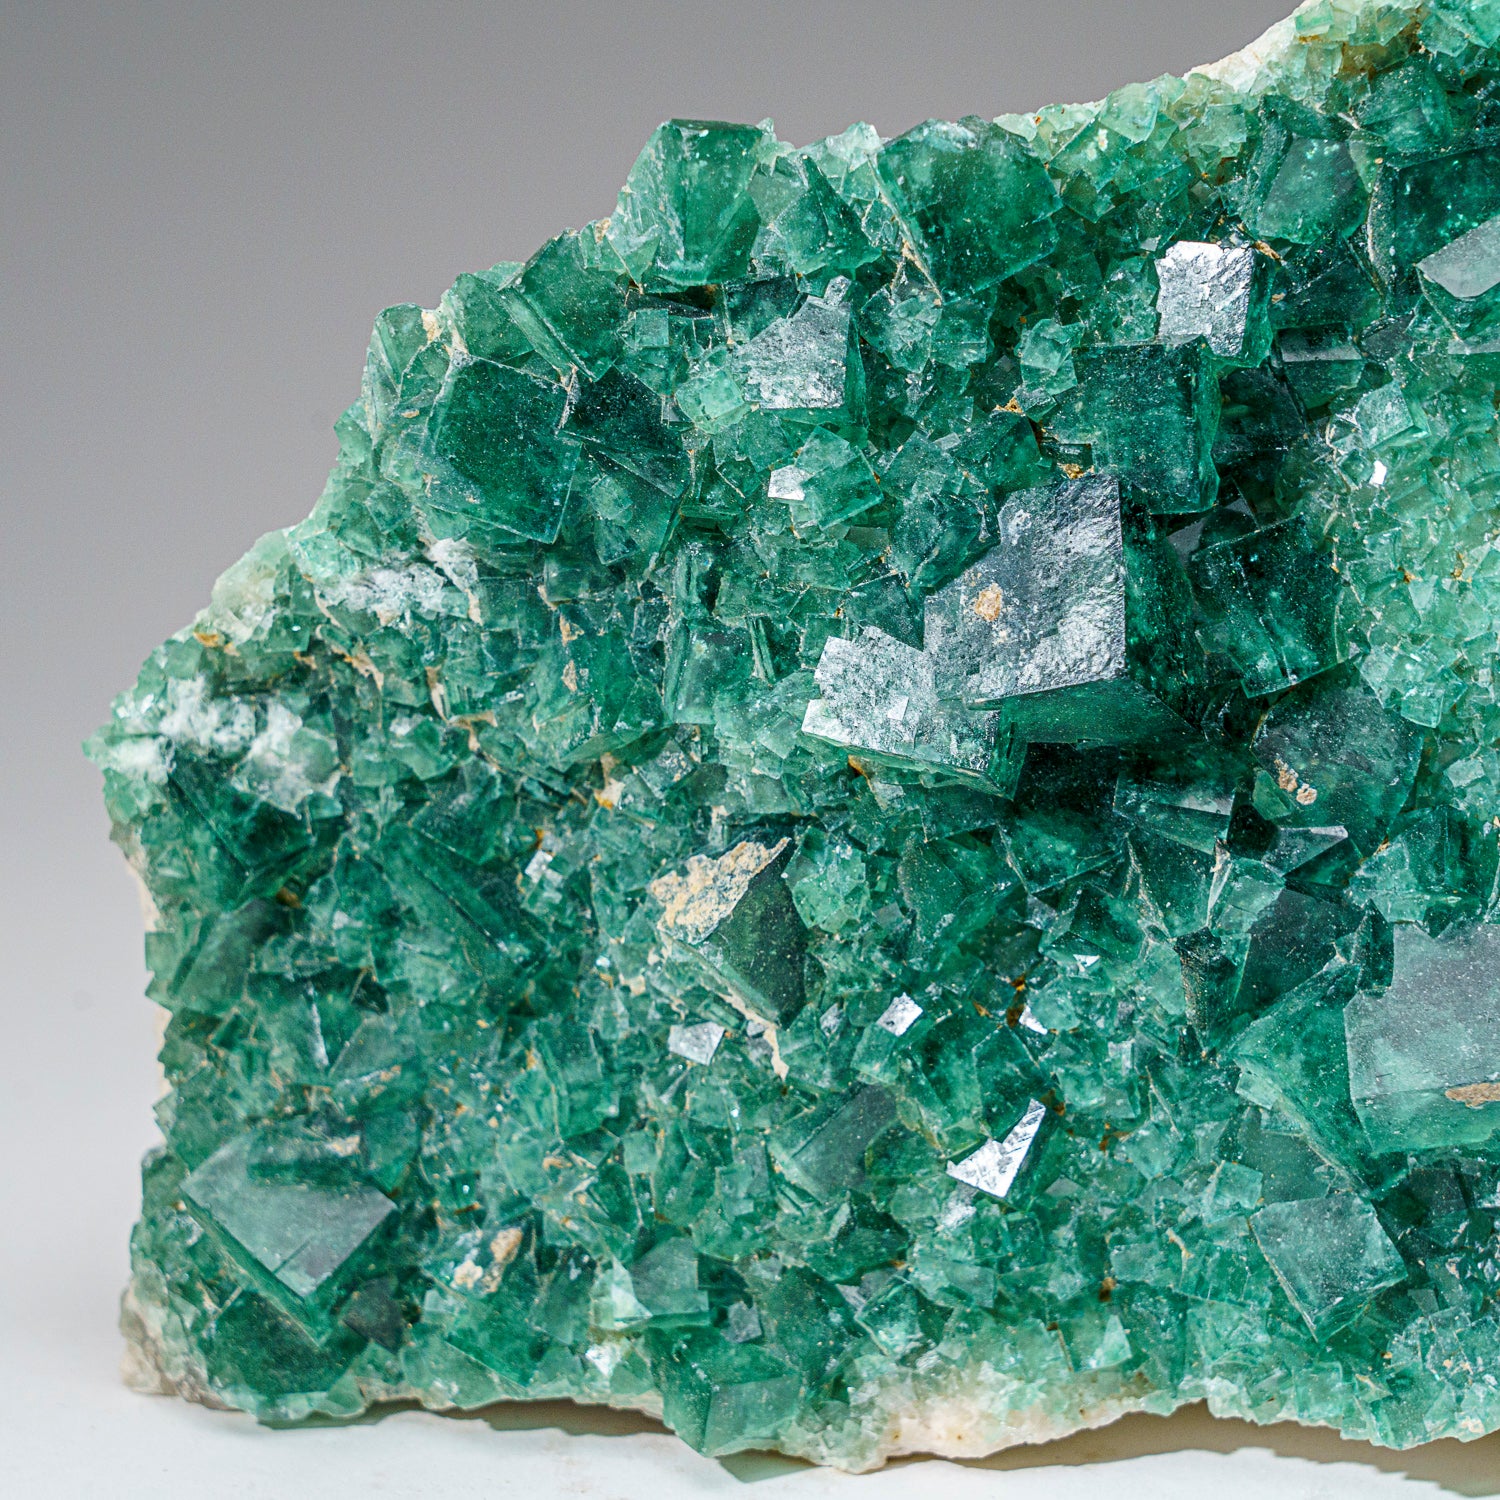 Genuine Green Fluorite from Namibia (5.25 lbs)